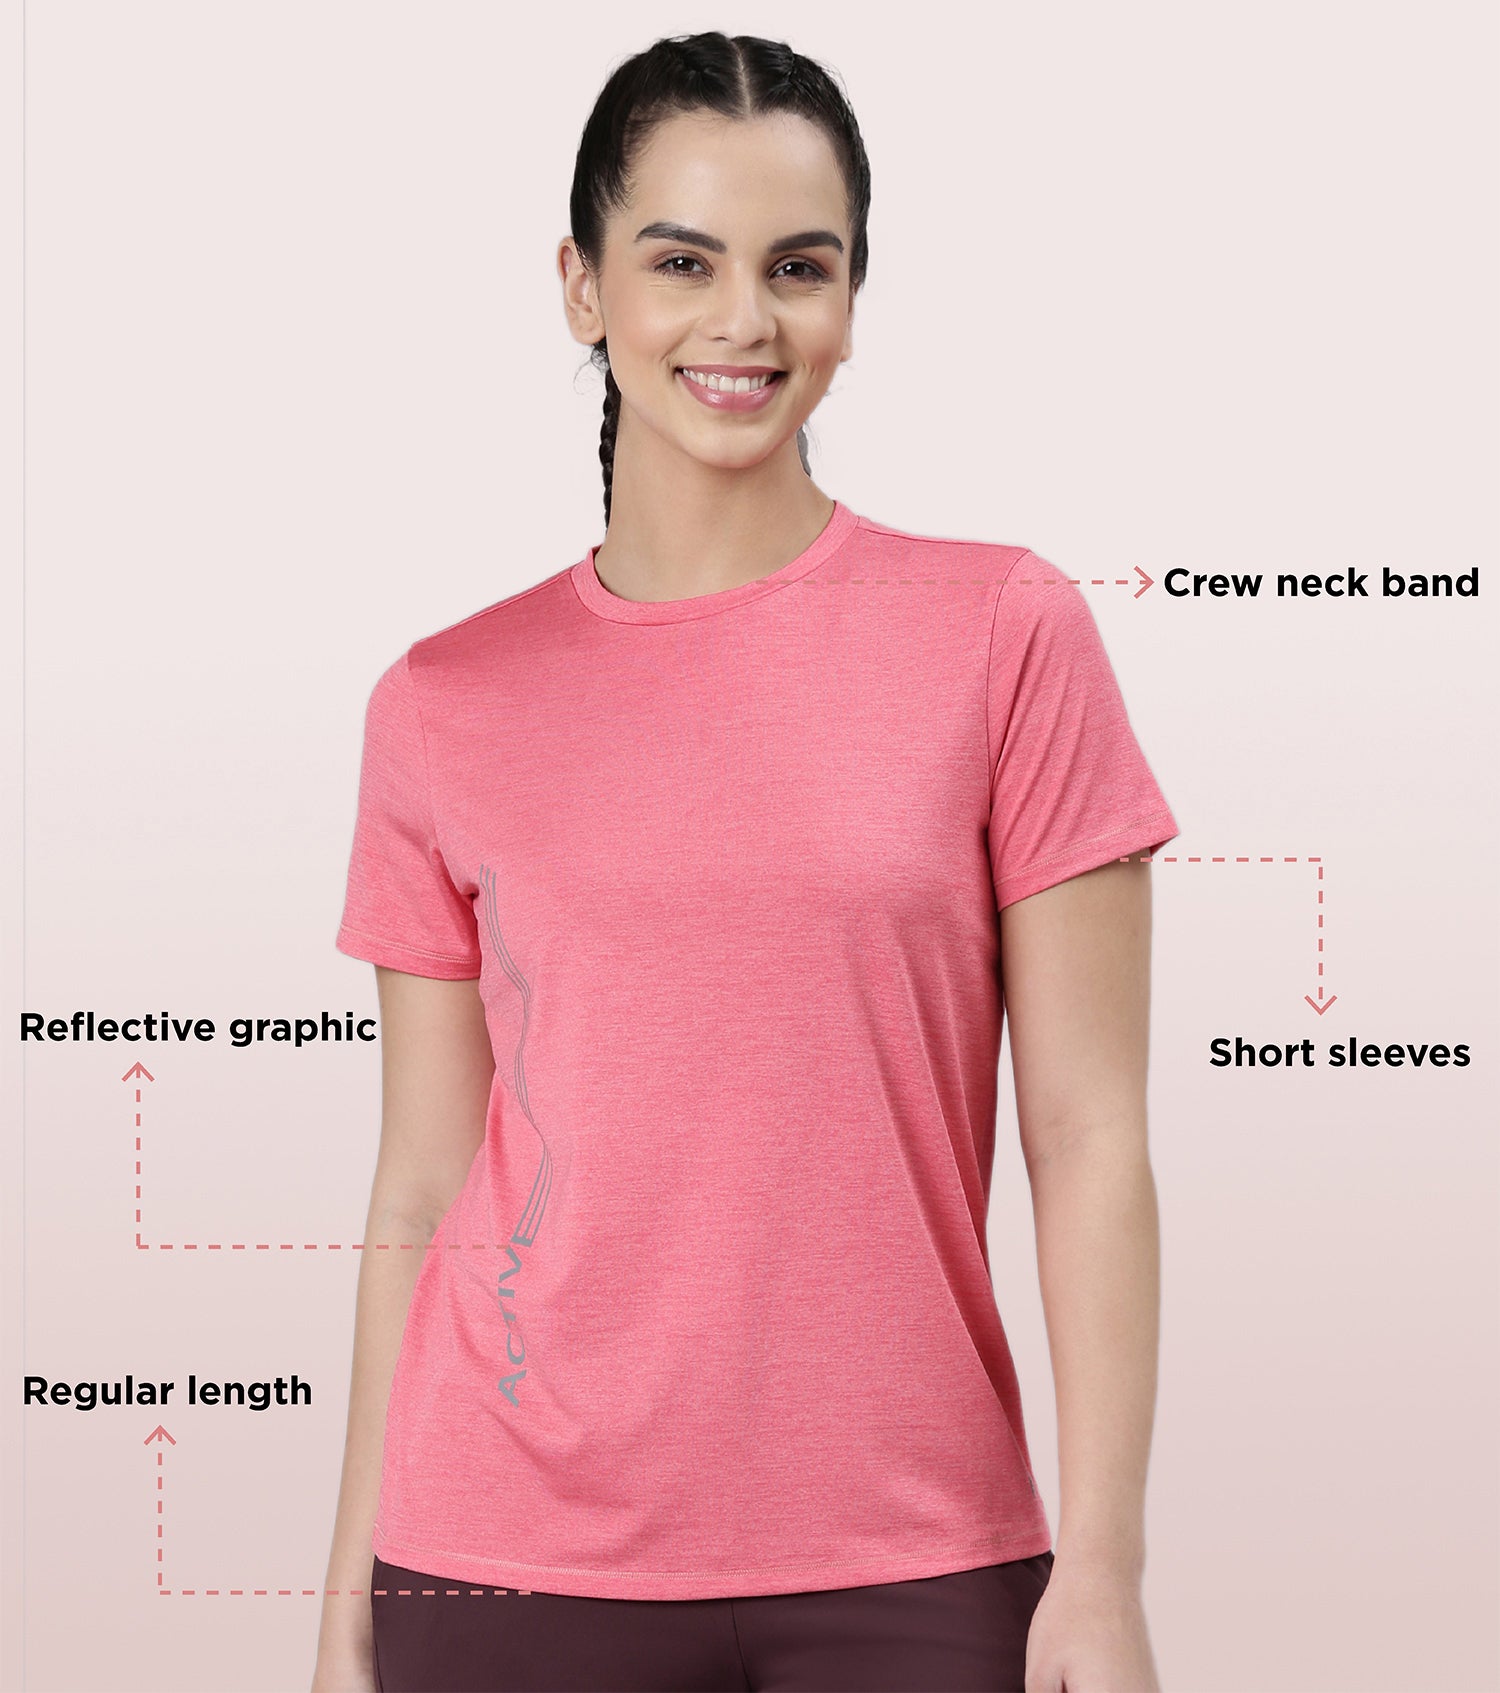 Basic Workout Crew Tee | Dry Fit Crew Neck Activewear Tee Relaxed Fit | Regular Length | A309